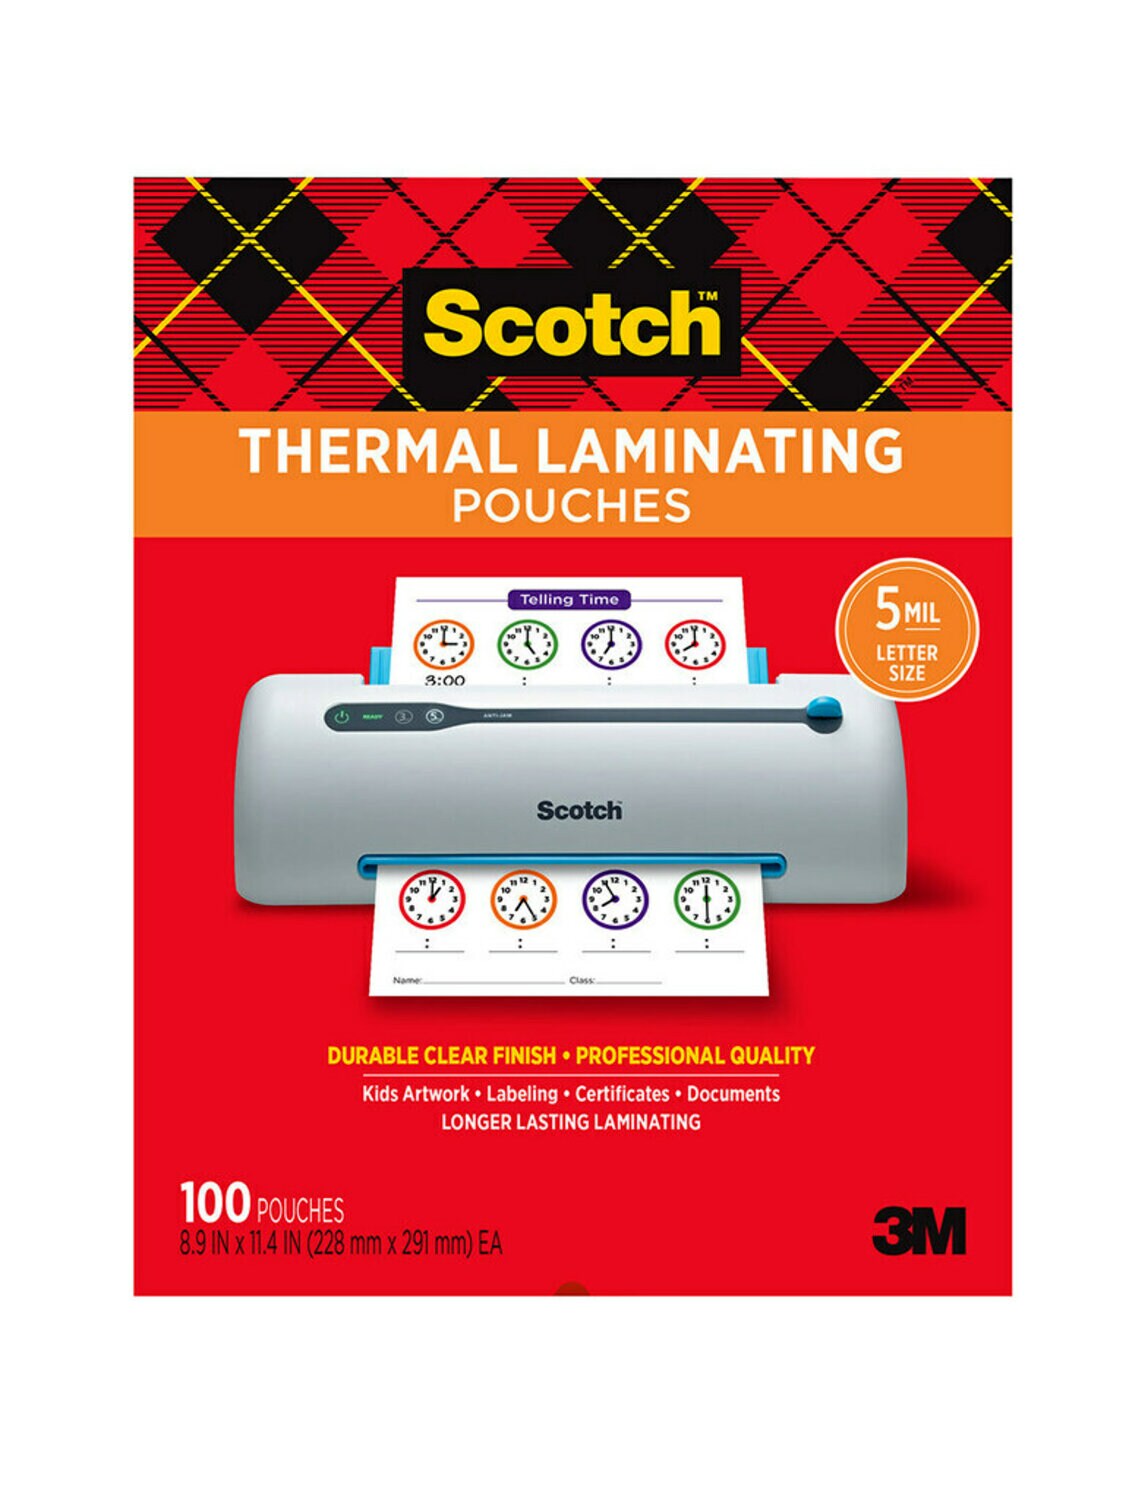 7100265300 - Scotch Thermal Pouches 5 mil TP5854-100, 8.9 in x 11.4 in (228 mm x 291 mm)